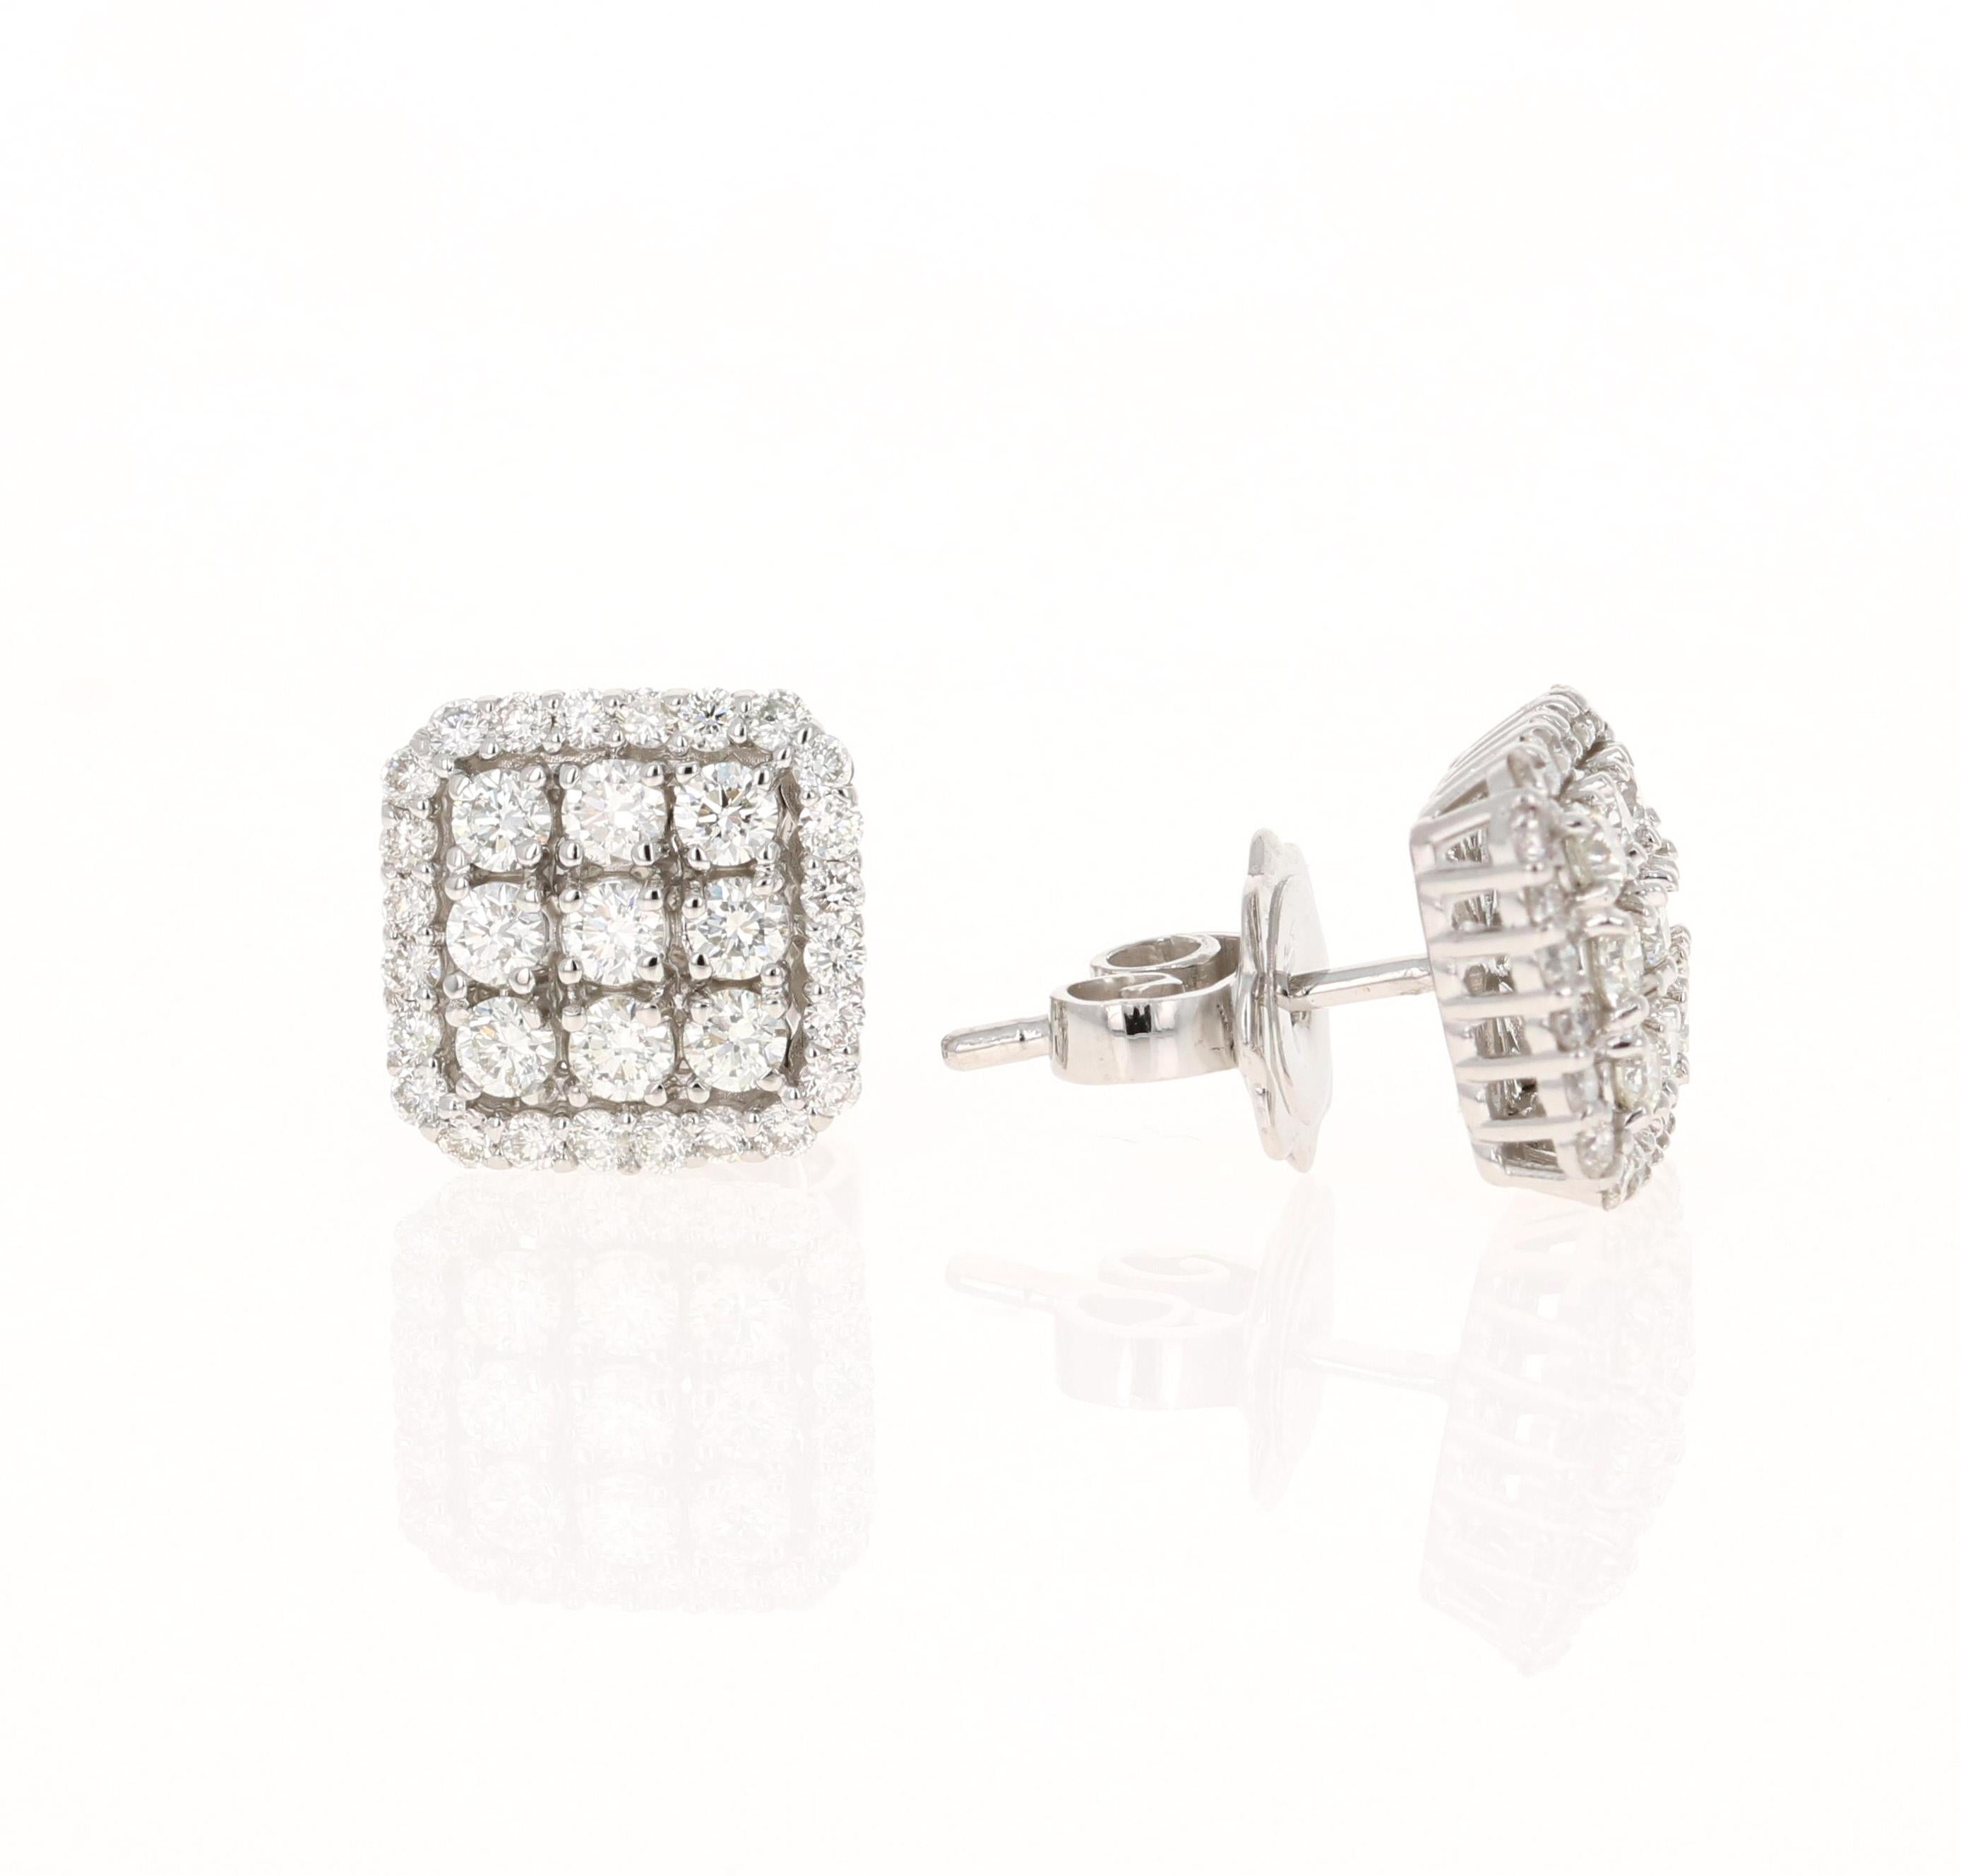 These earrings have 66 Round Cut Diamonds that weigh 1.06 carats. The clarity is VS and color is H. The width of the earrings are approximately 9.5 mm

The backing of the earring is a standard push back. The Earrings are made in 14K White Gold and